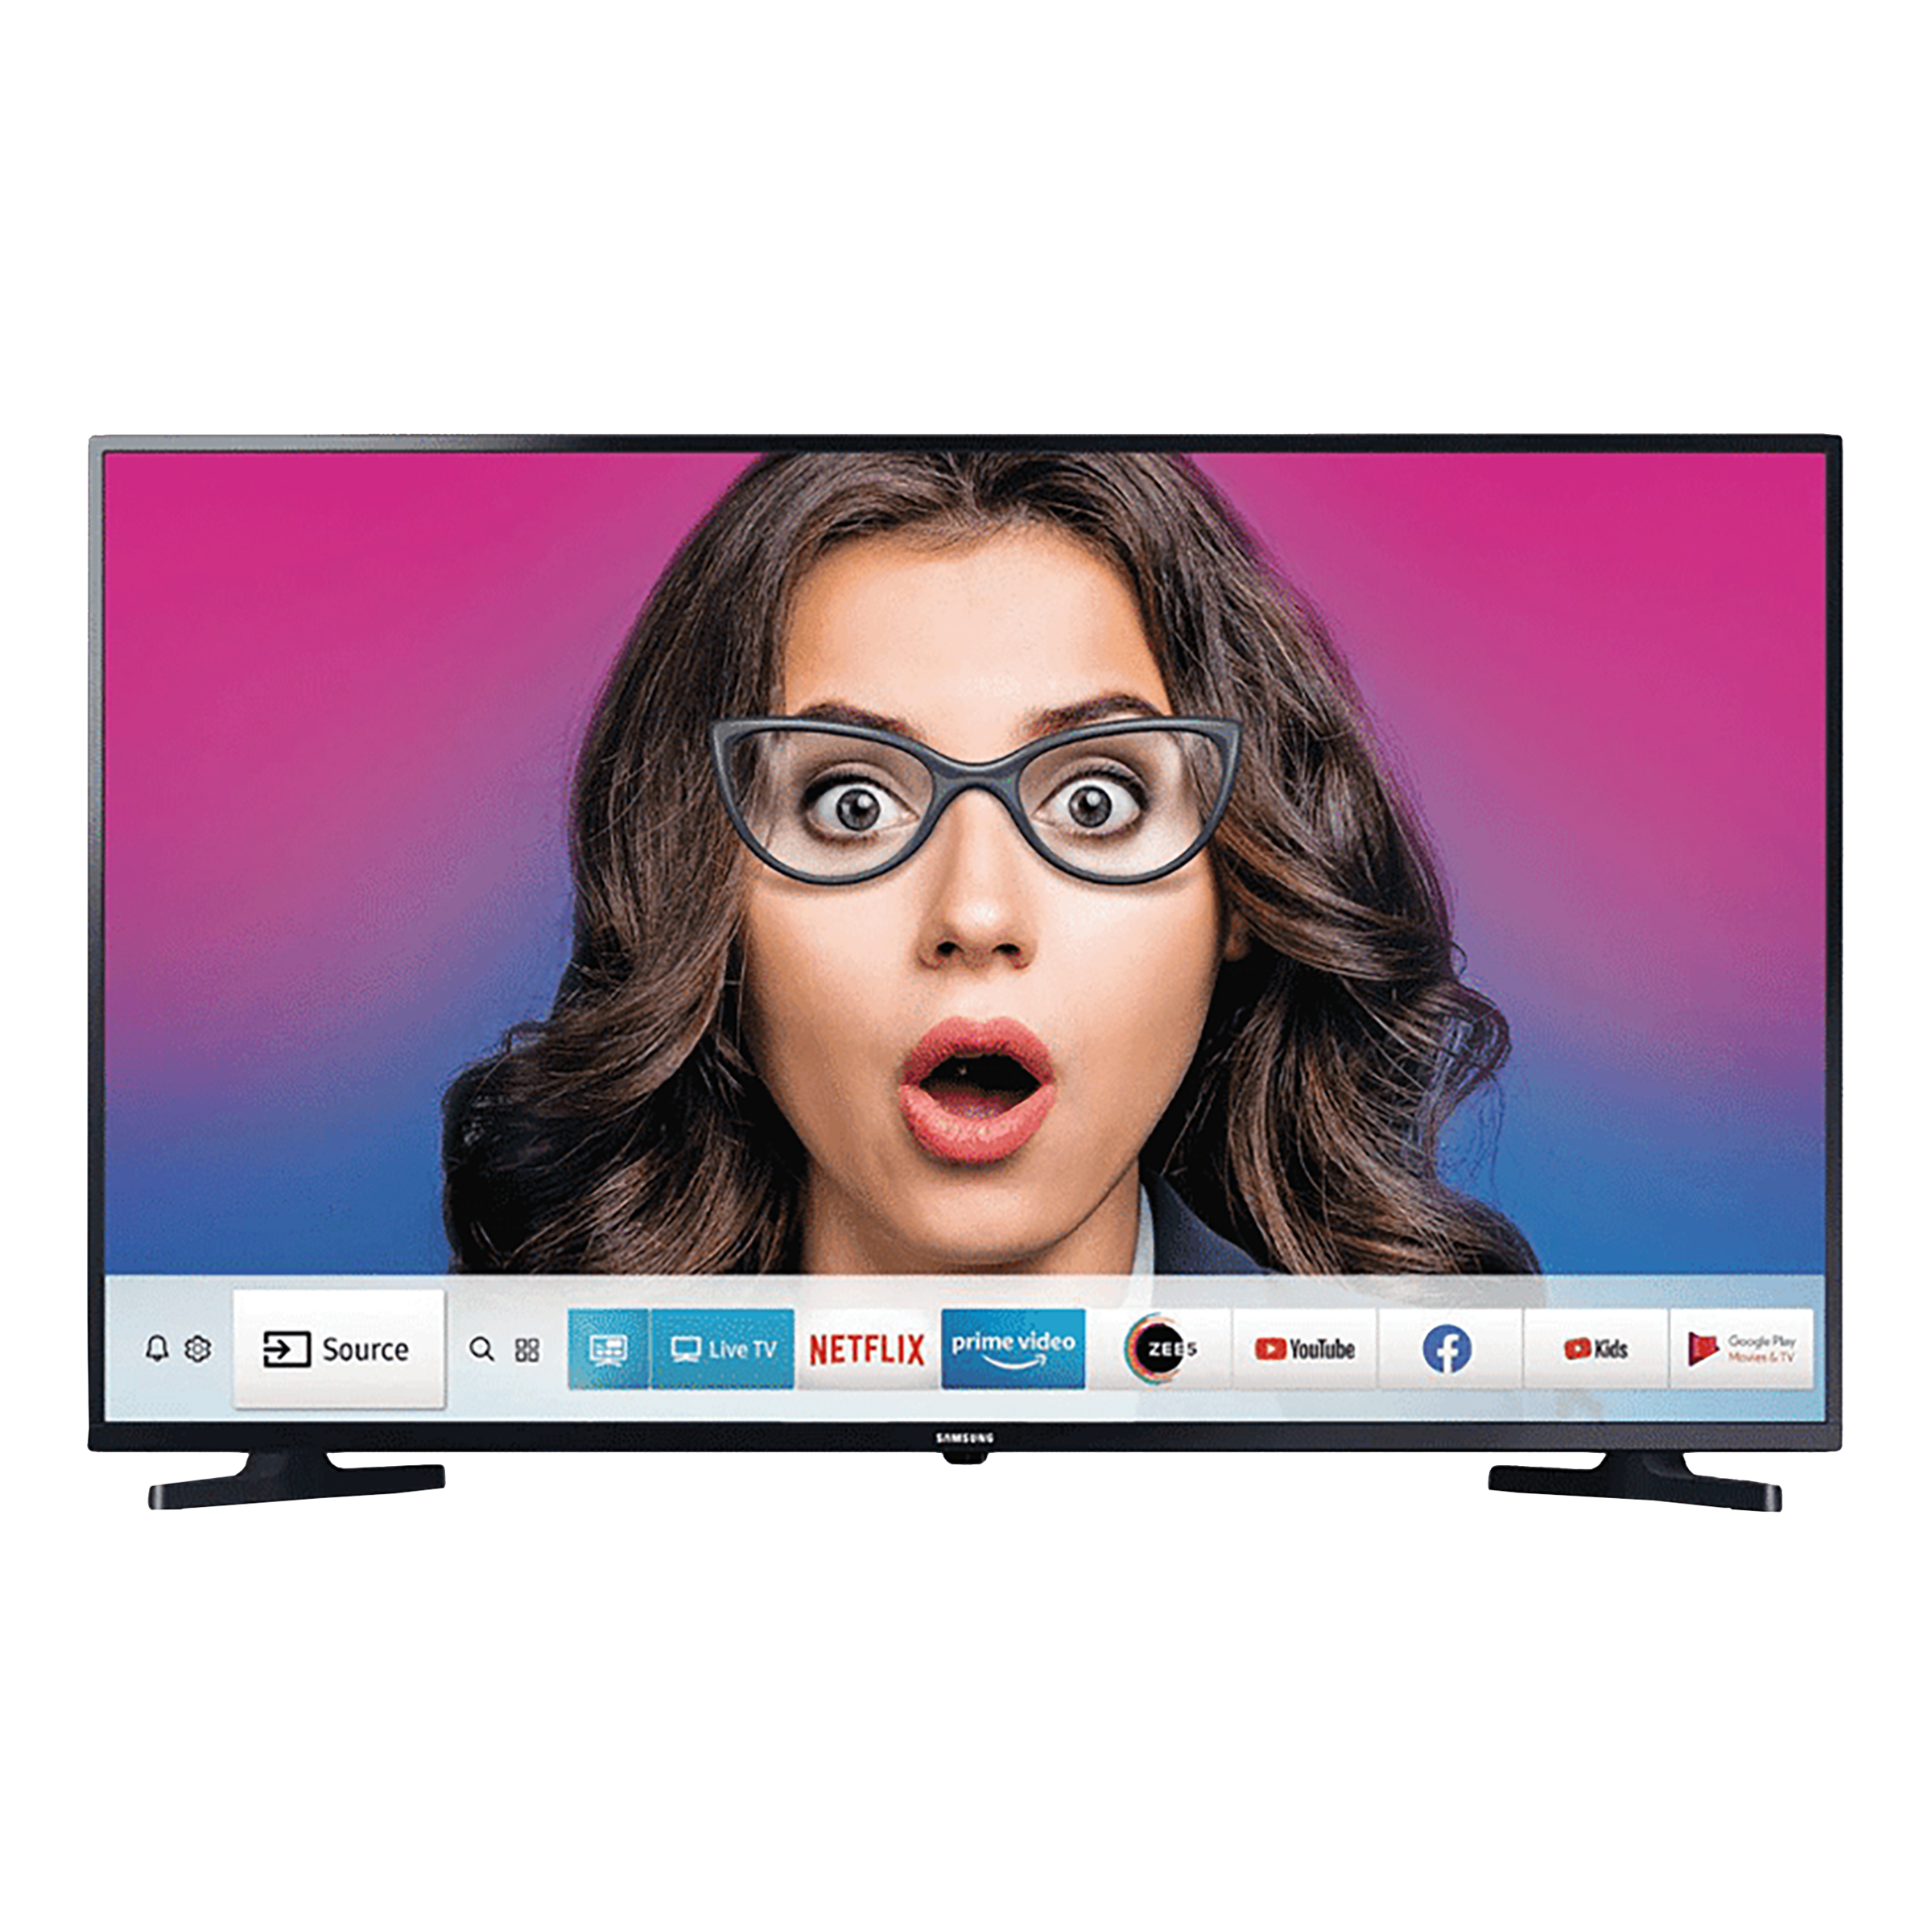 SAMSUNG Series 5 108 cm (43 inch) Full HD LED Smart Tizen TV with Hyper Real Picture Engine_1